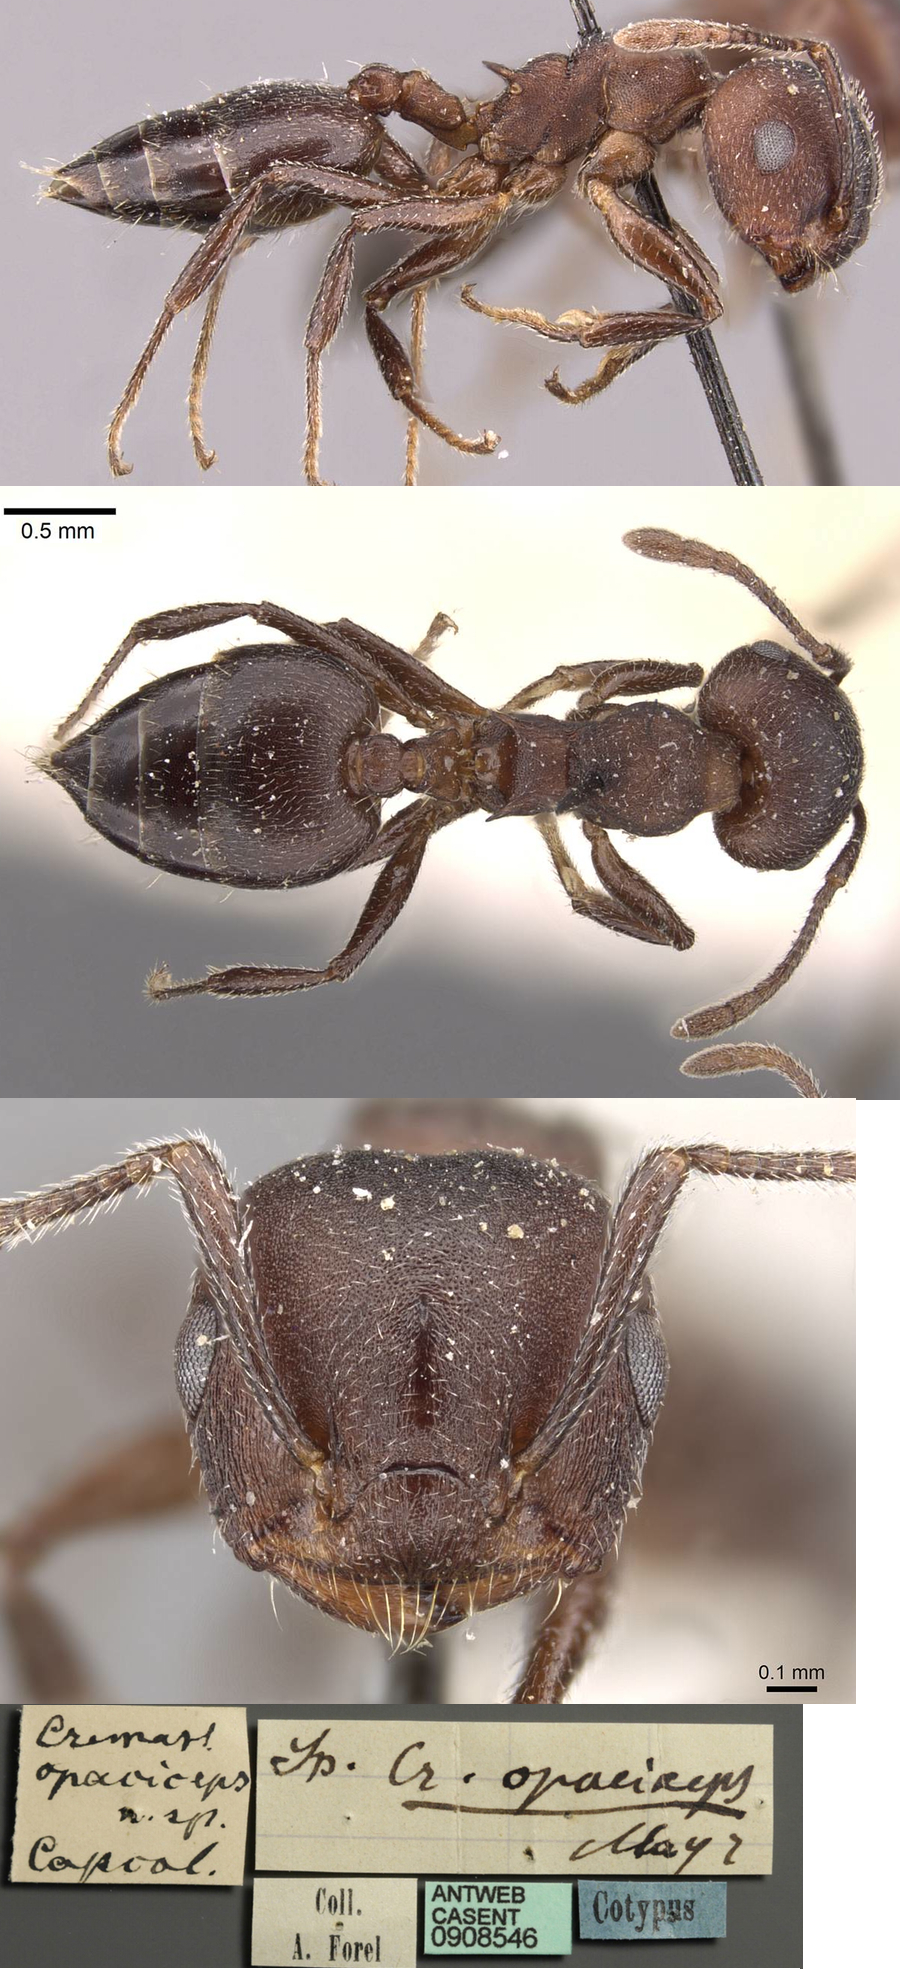 {Crematogaster opaciceps}